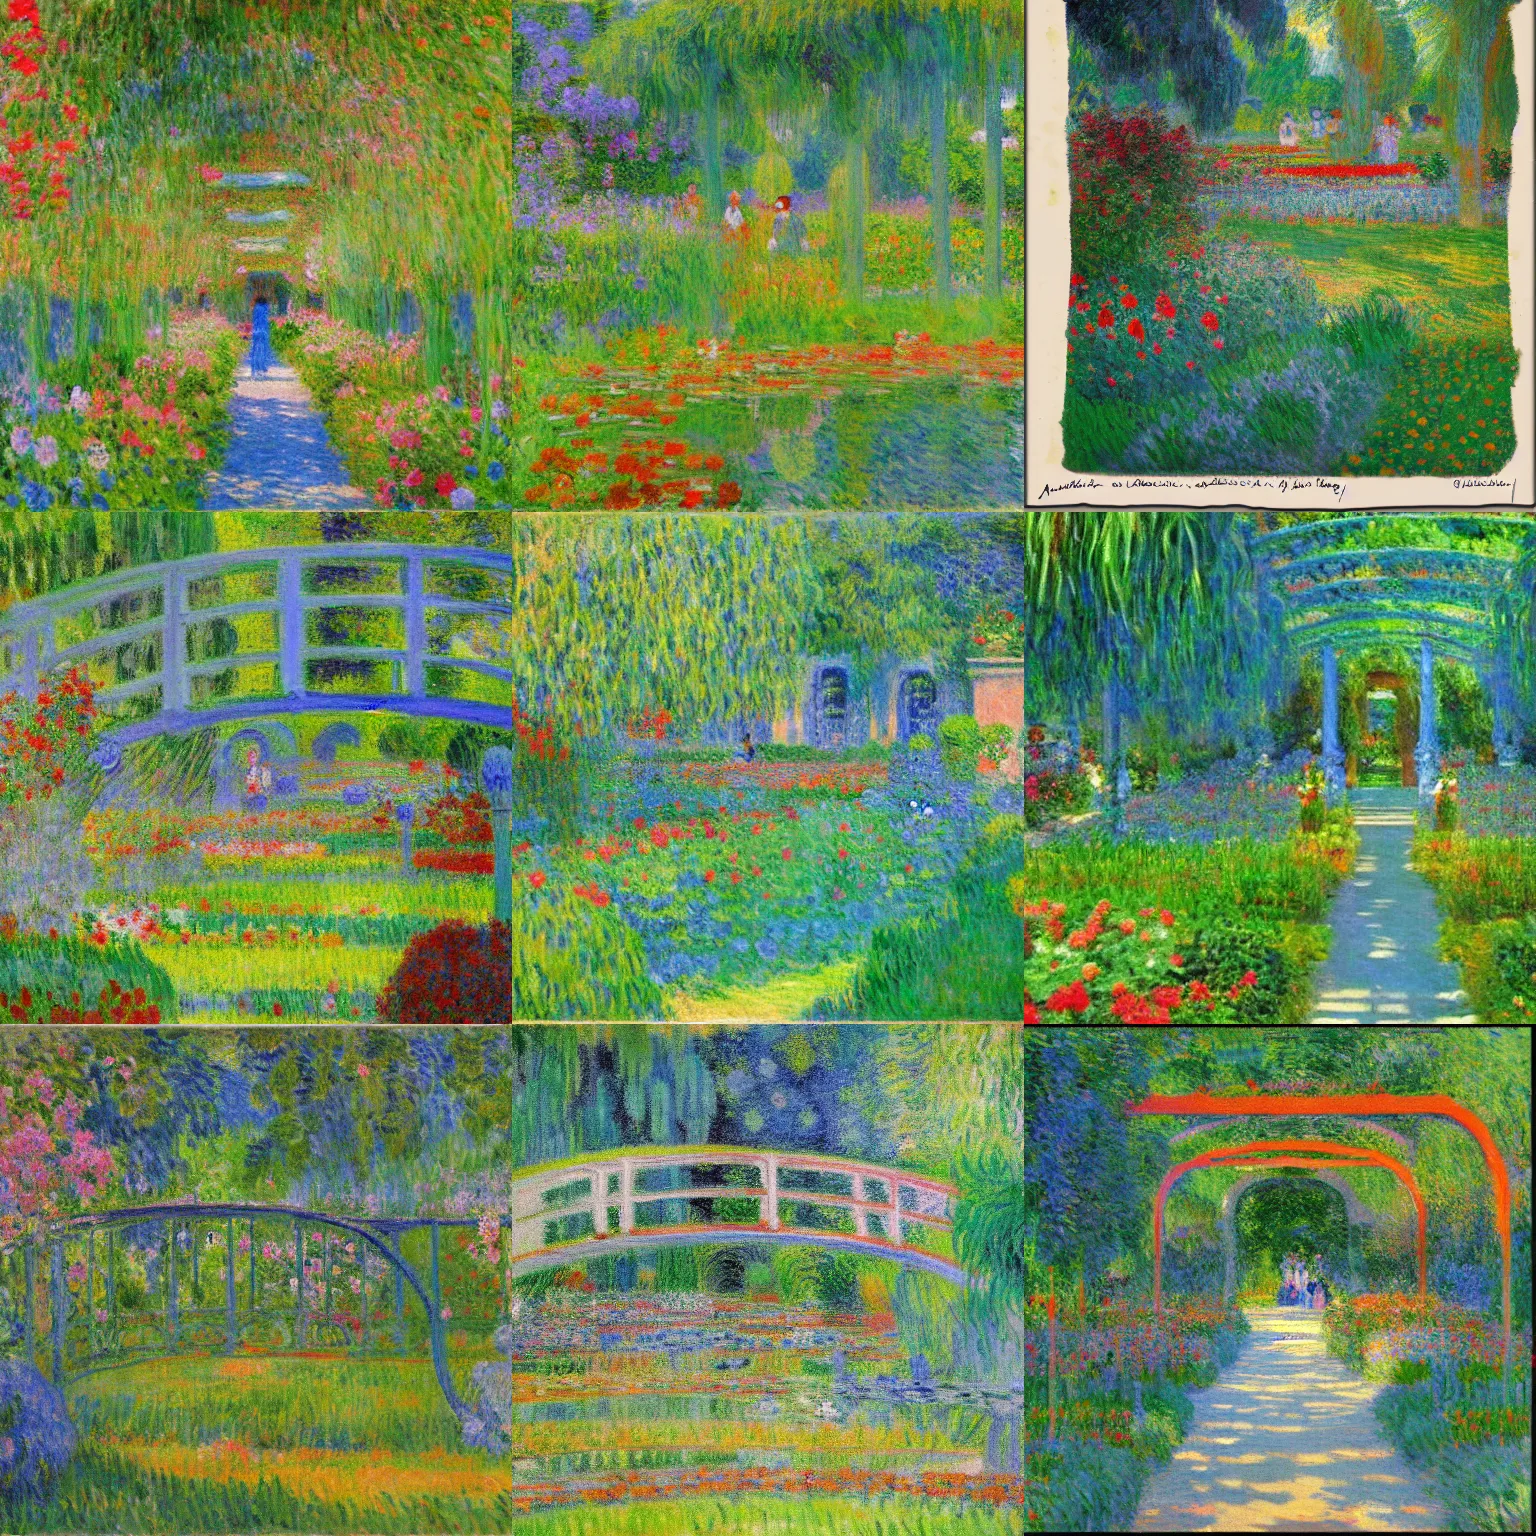 Prompt: an image of monet's garden in france but in the style of gauguin